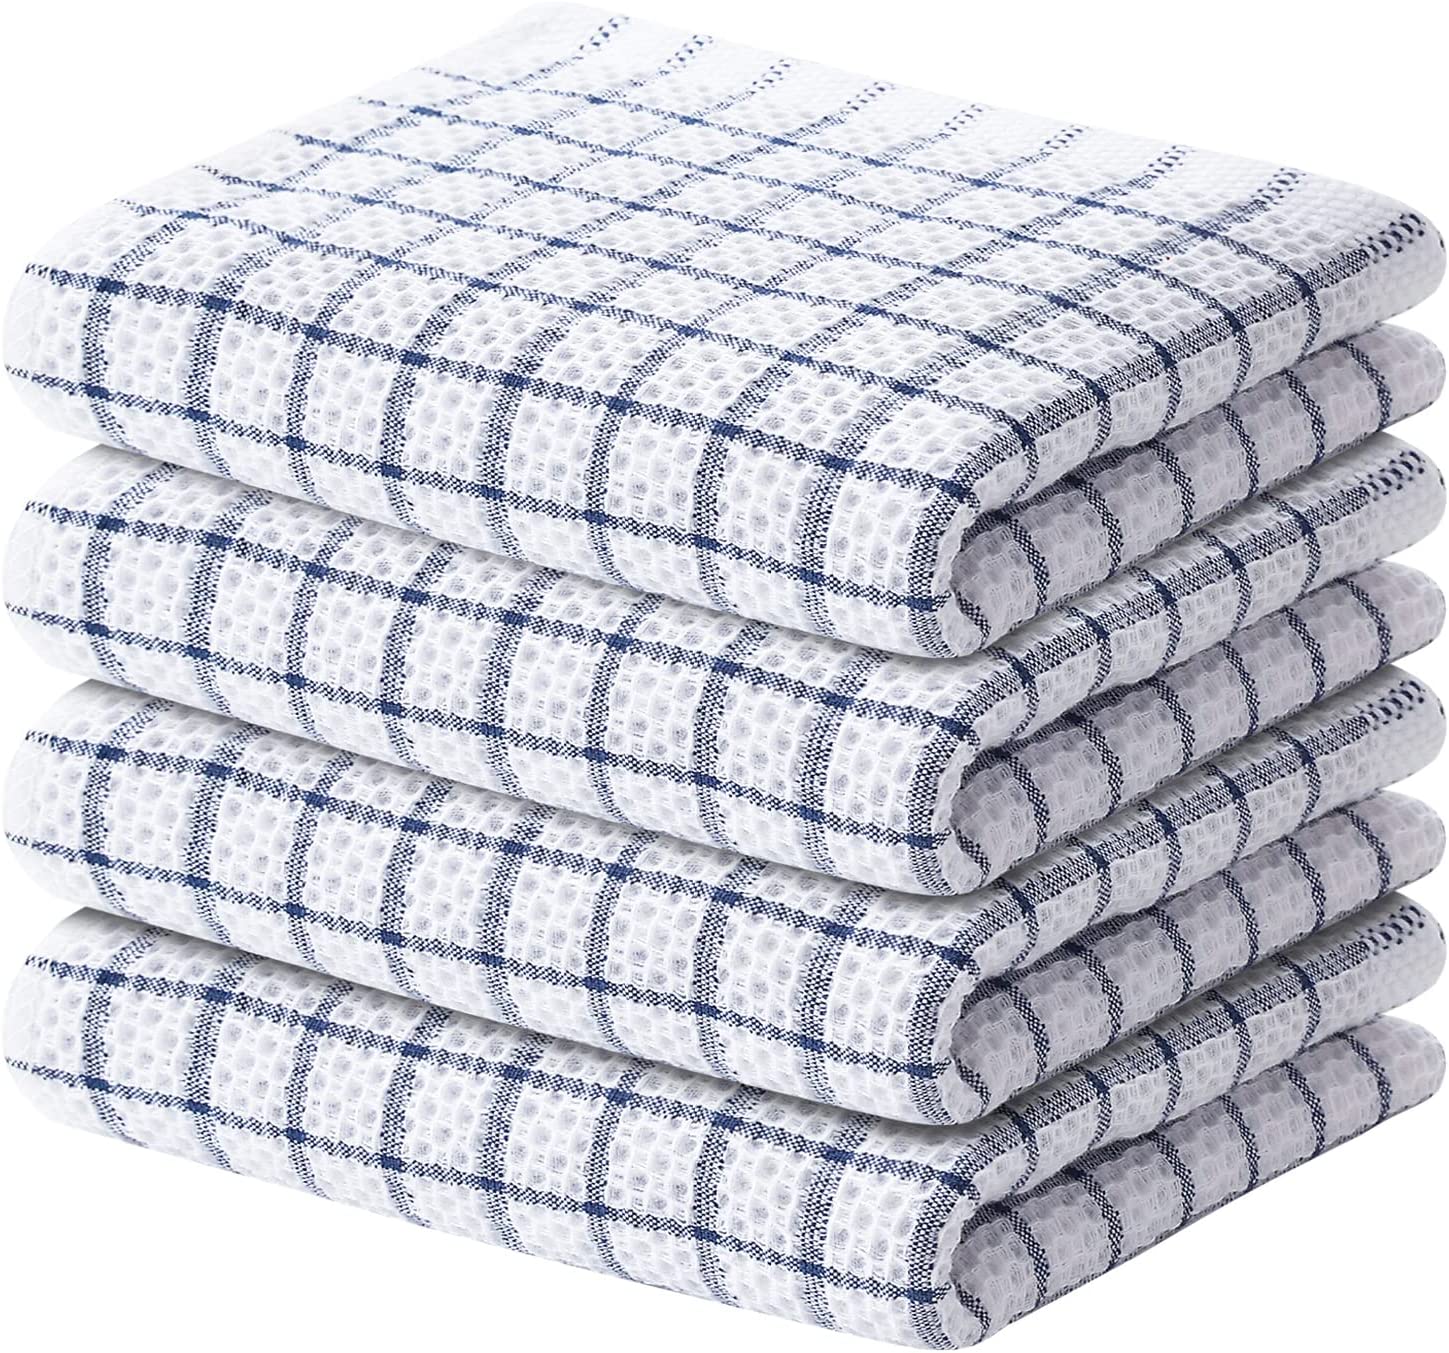 Fintale 100% Cotton Dish Cloths - Soft, Super Absorbent and Lint